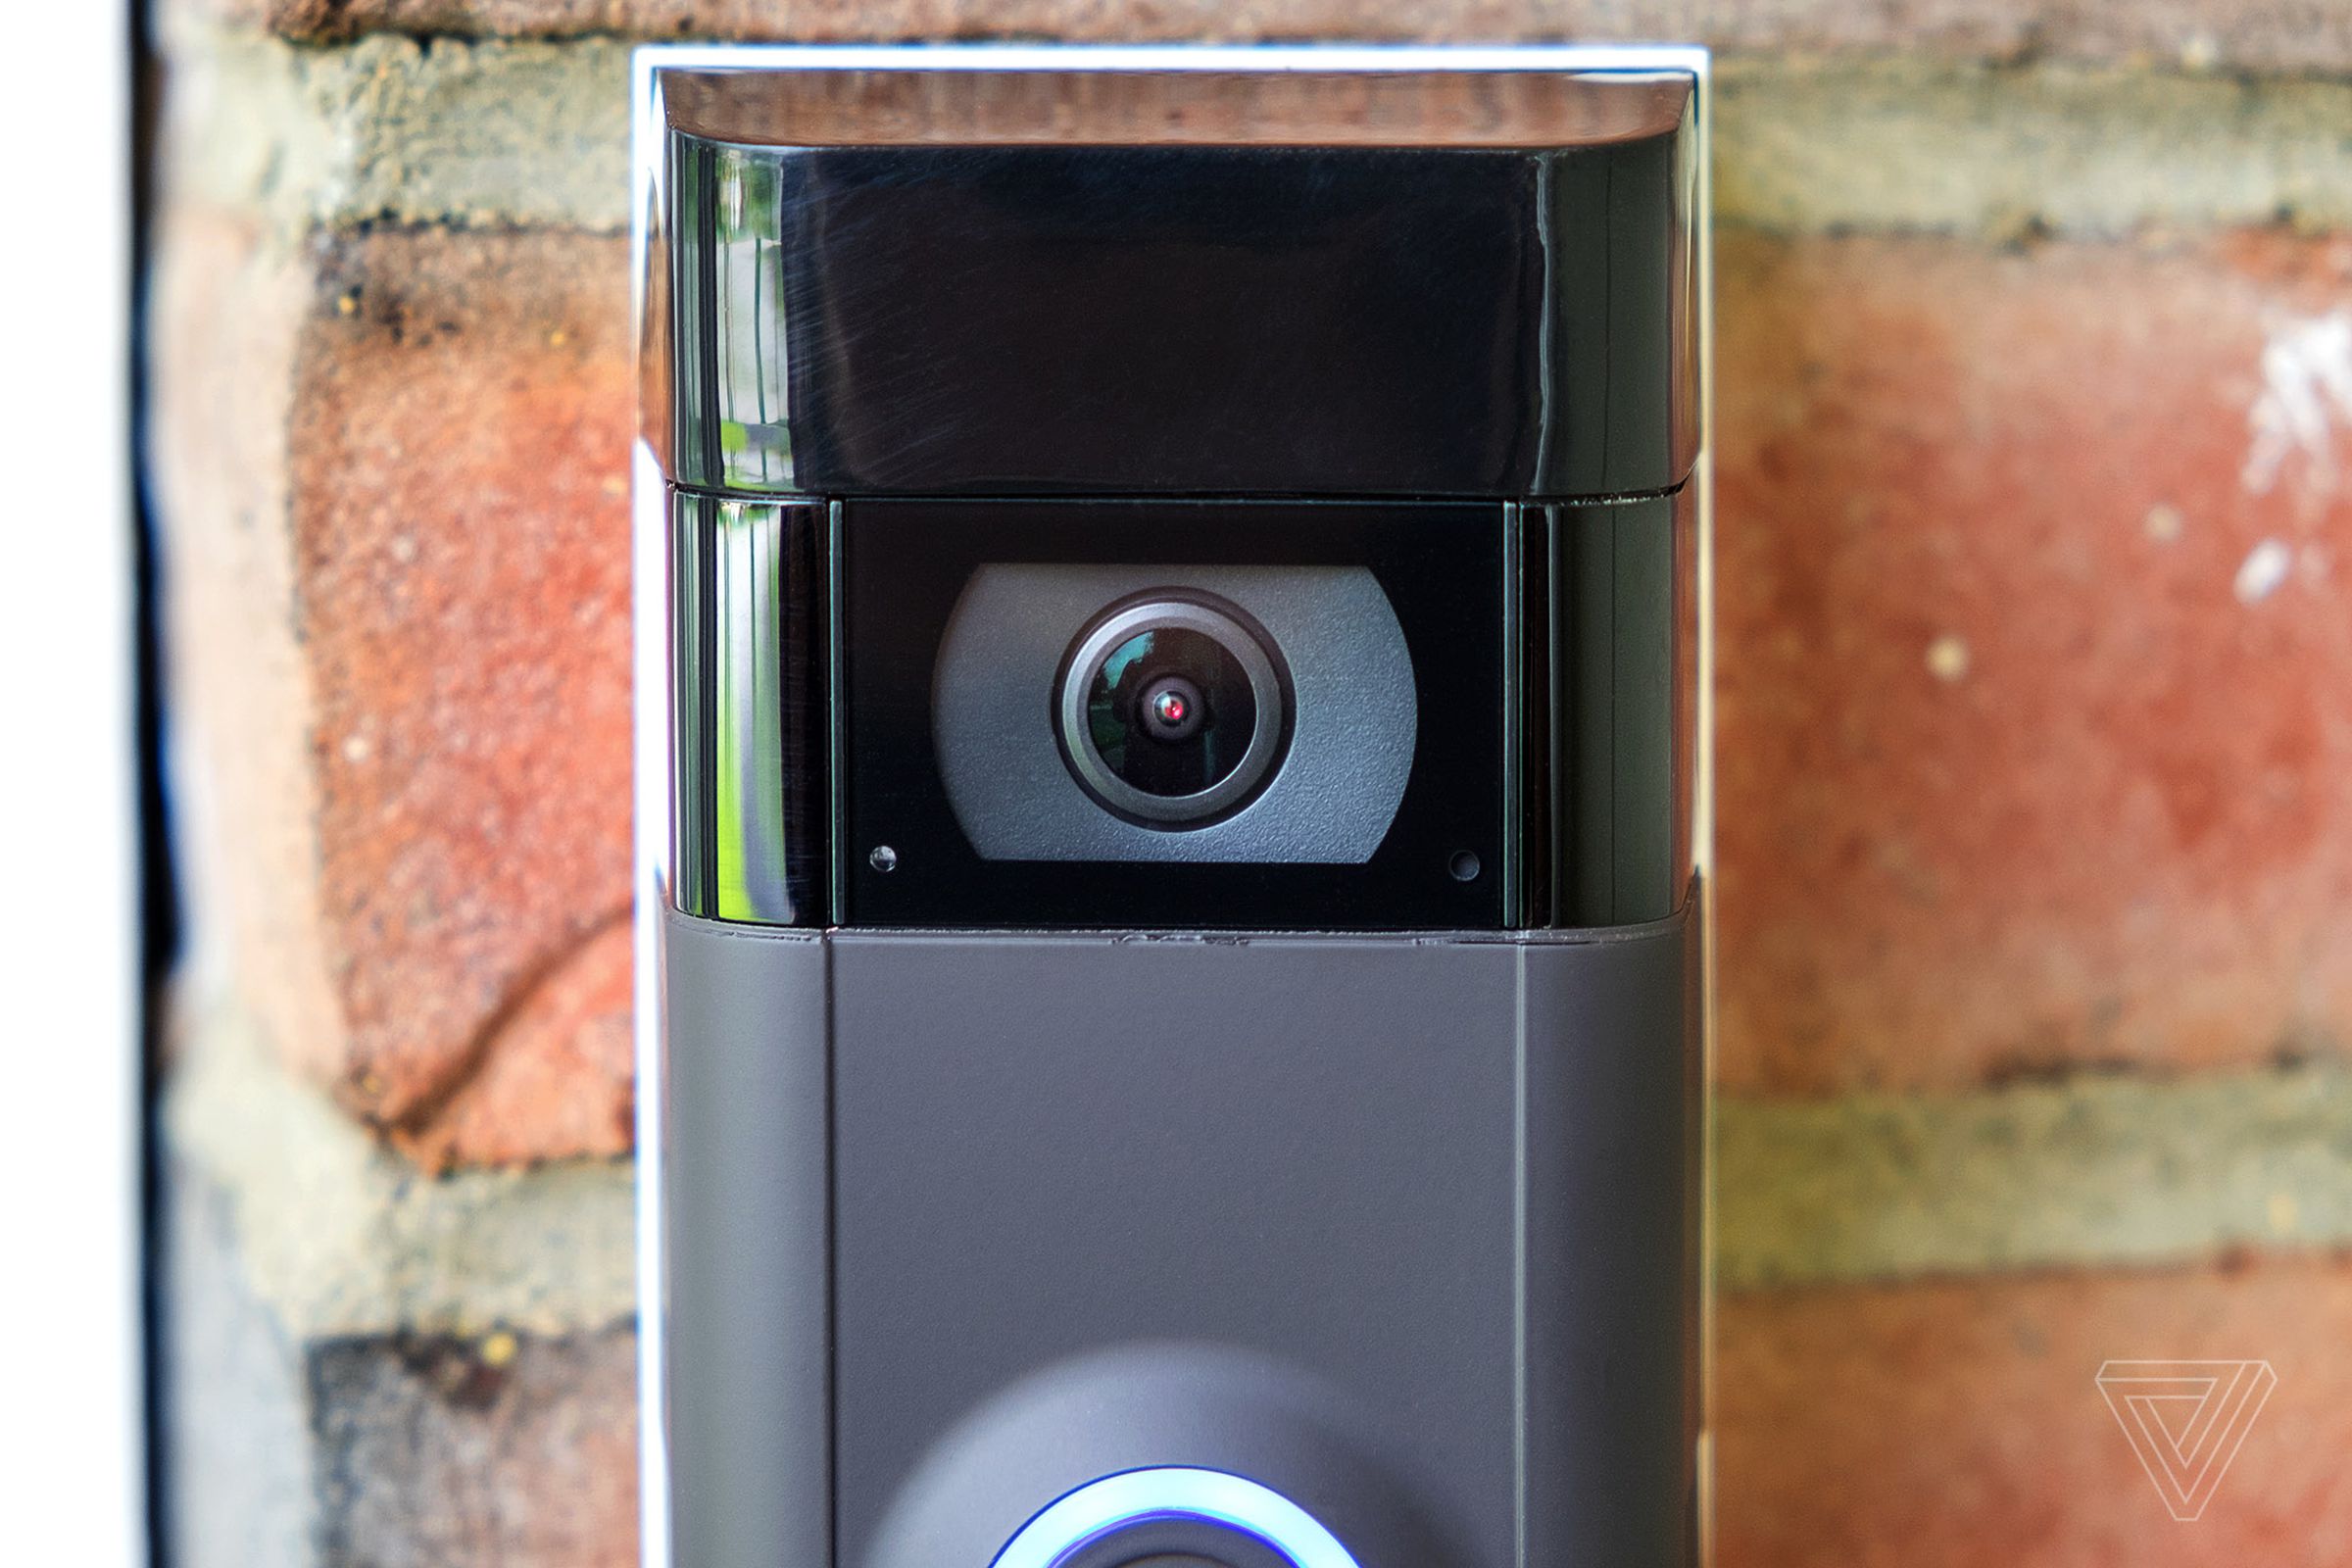 A Ring doorbell equipped with a camera